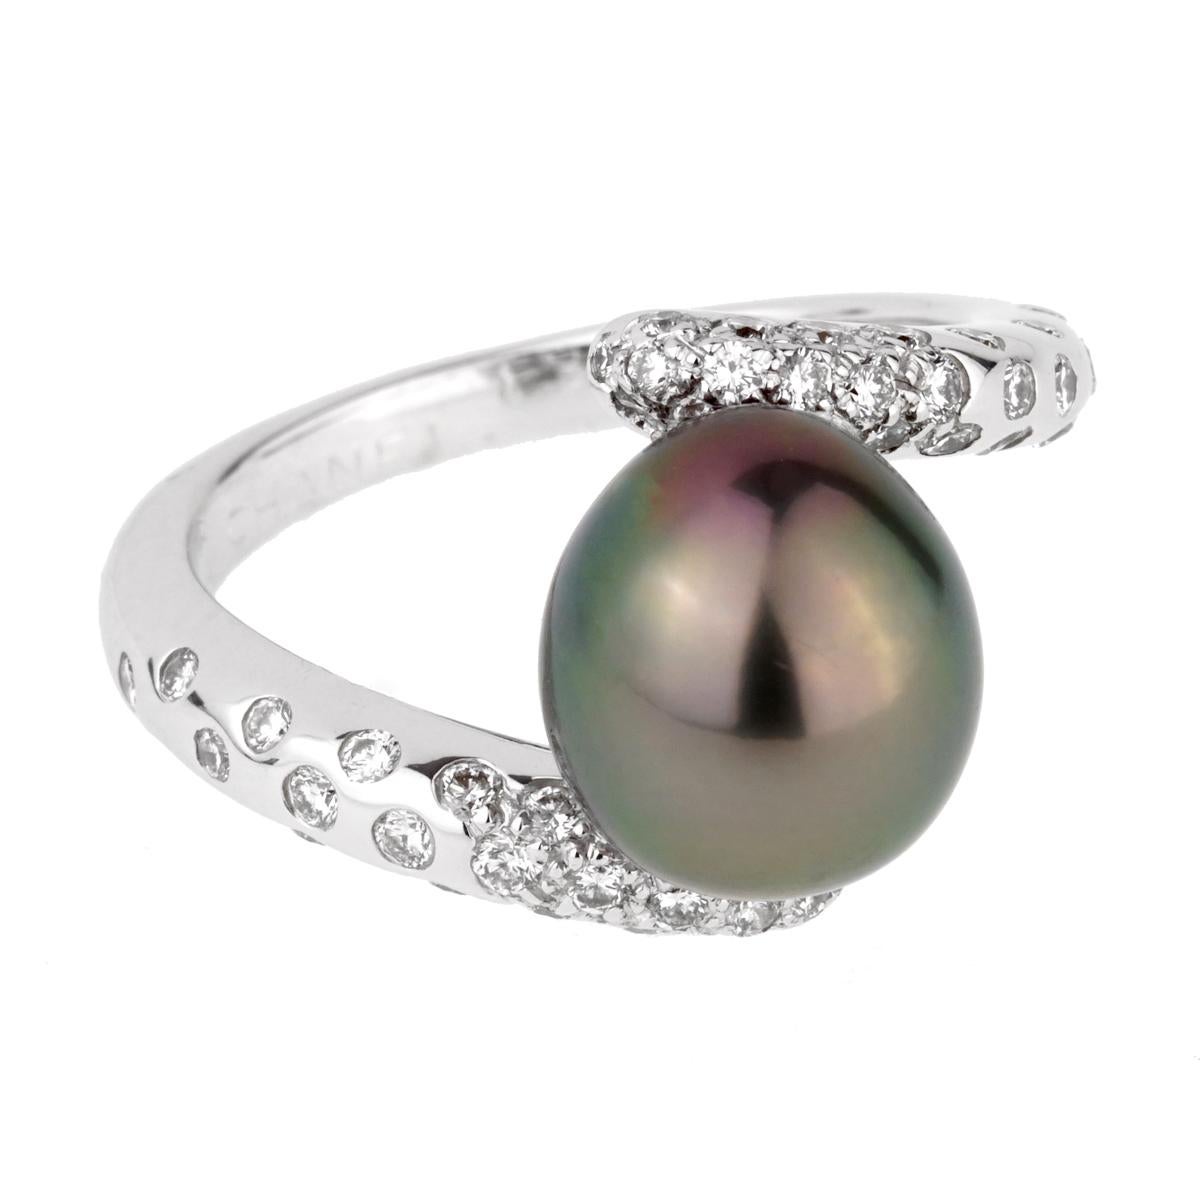 A fabulous Chanel ring from the Concept collection circa 2001 featuring a 10.5mm pearl surround by the finest Chanel round brilliant cut diamonds set in 18k white gold.